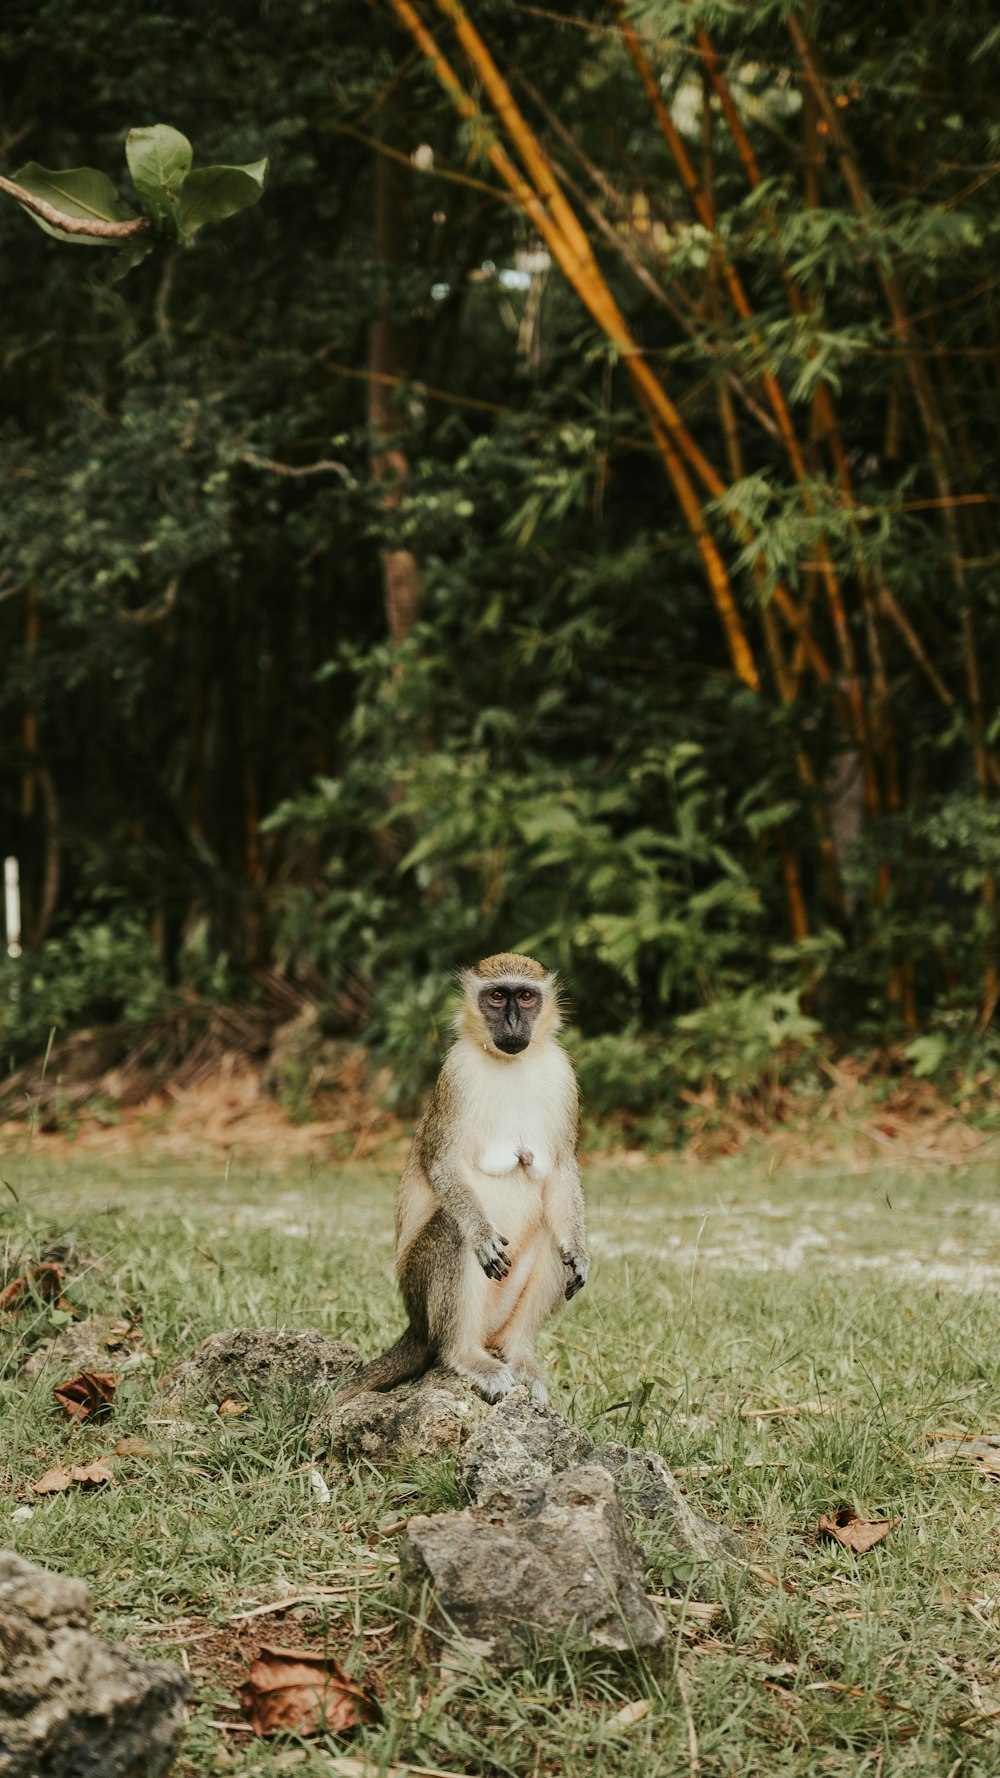 a monkey sitting on top of a lush green field